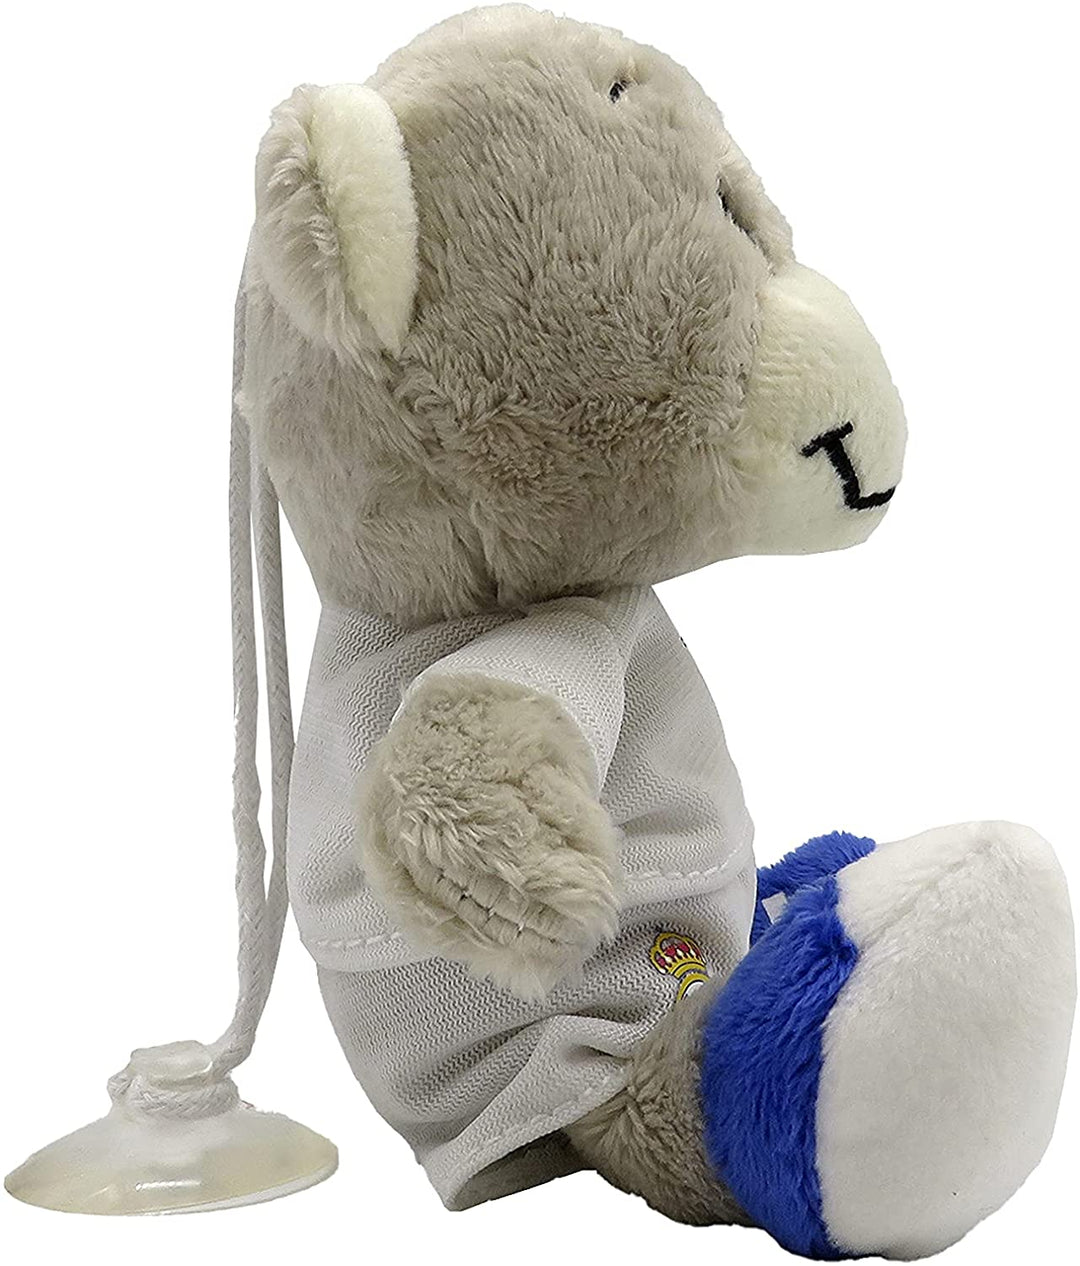 Real Madrid Teddy Bear with Suction Cup 17 cm, White CYP M-02-RM